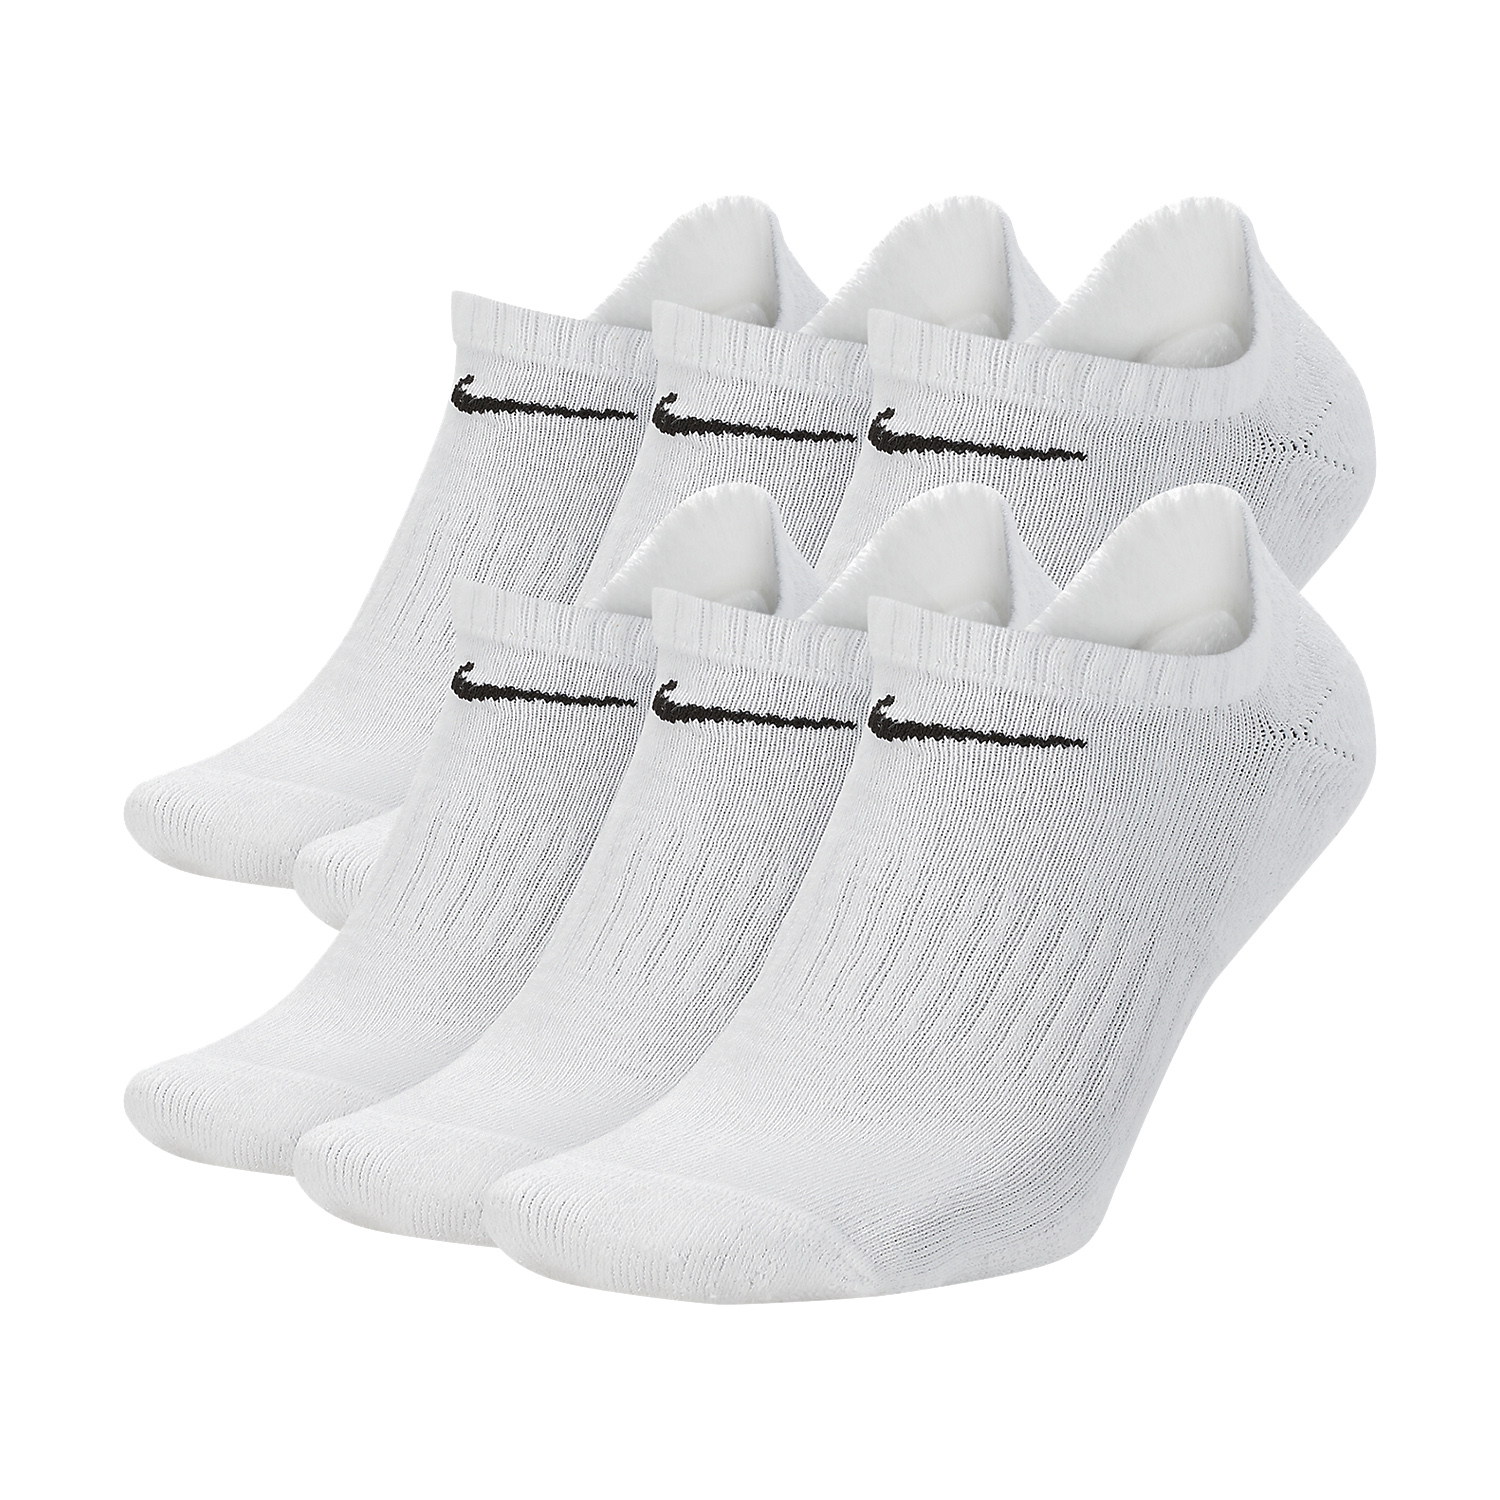 Nike Everyday Cushioned x 6 Calcetines - White/Black